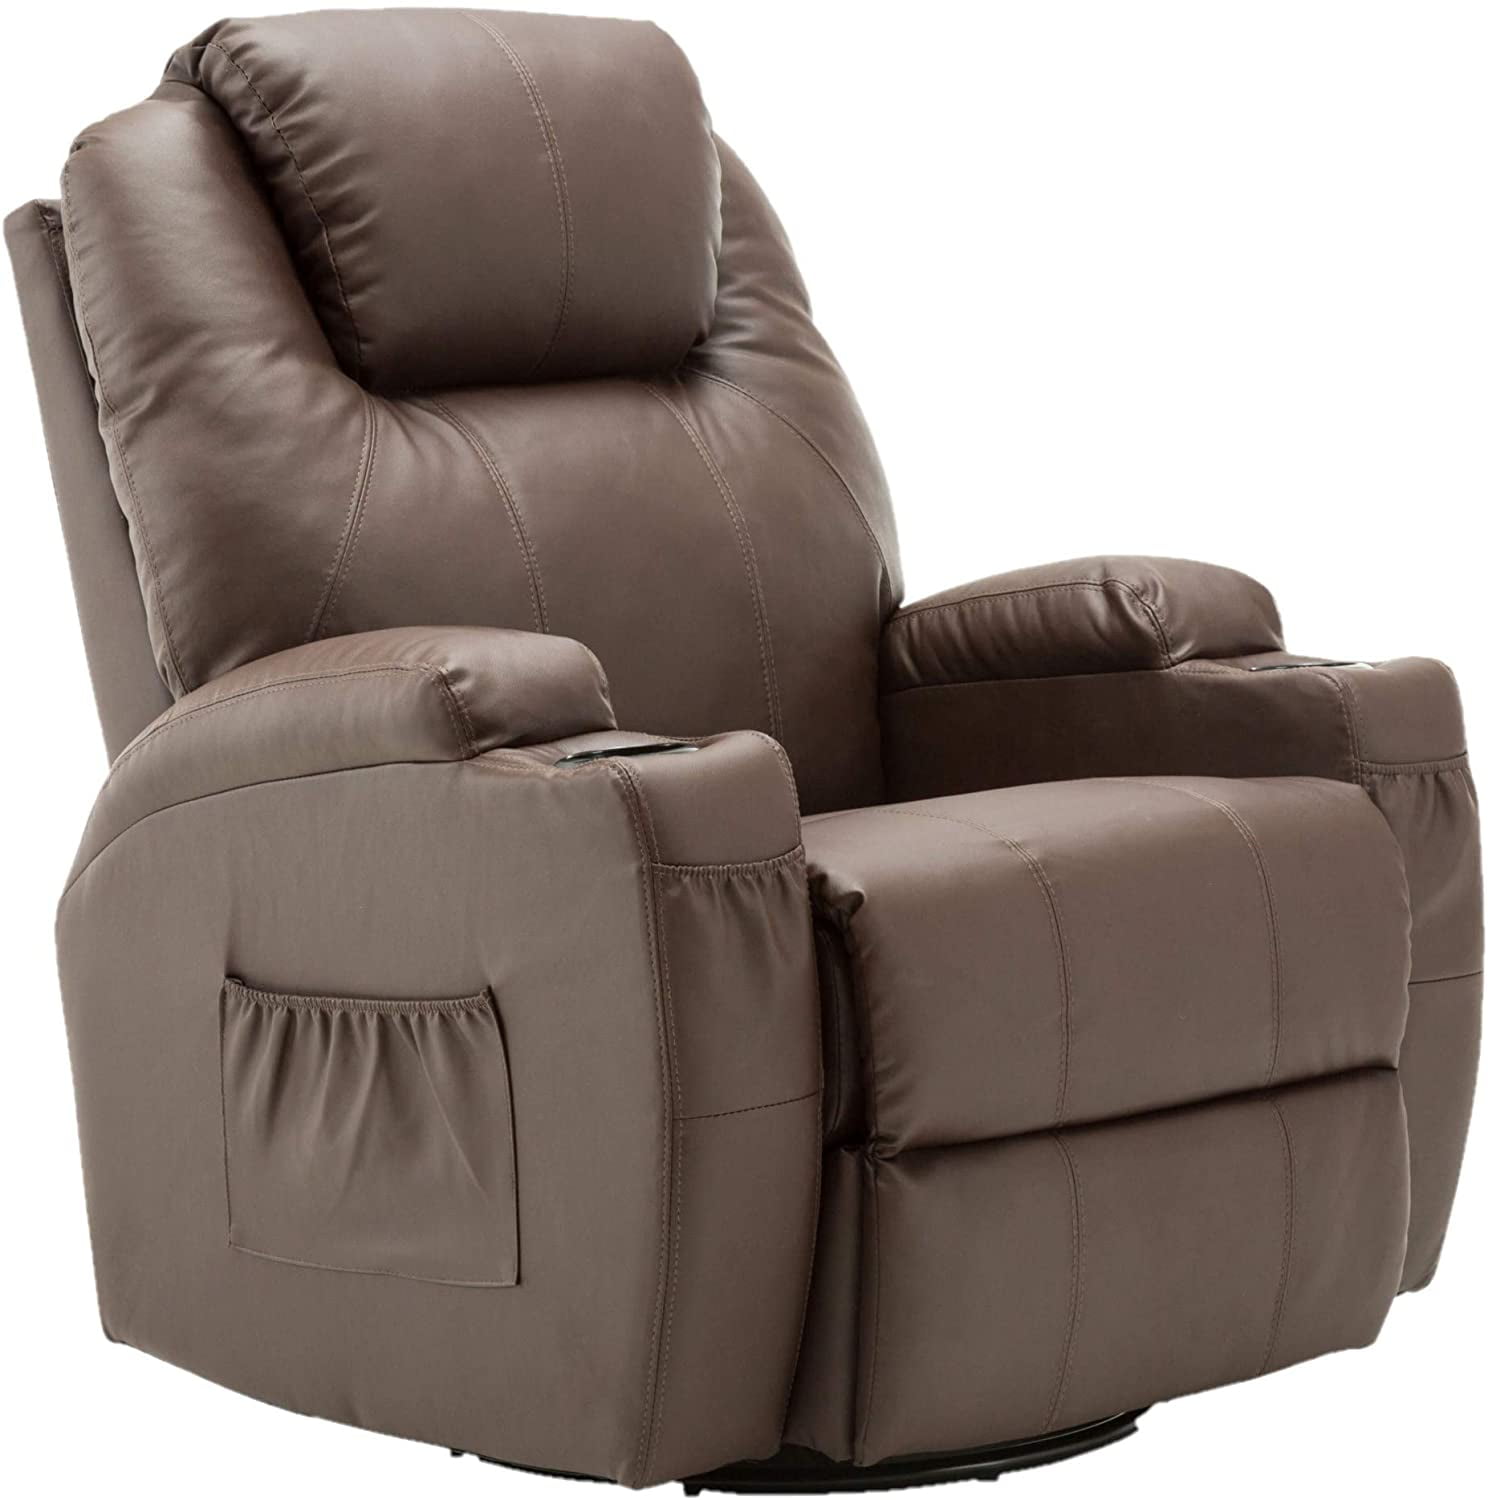 Mcombo Faux Leather Recliner Brown, Brown Leather Rocker Recliner